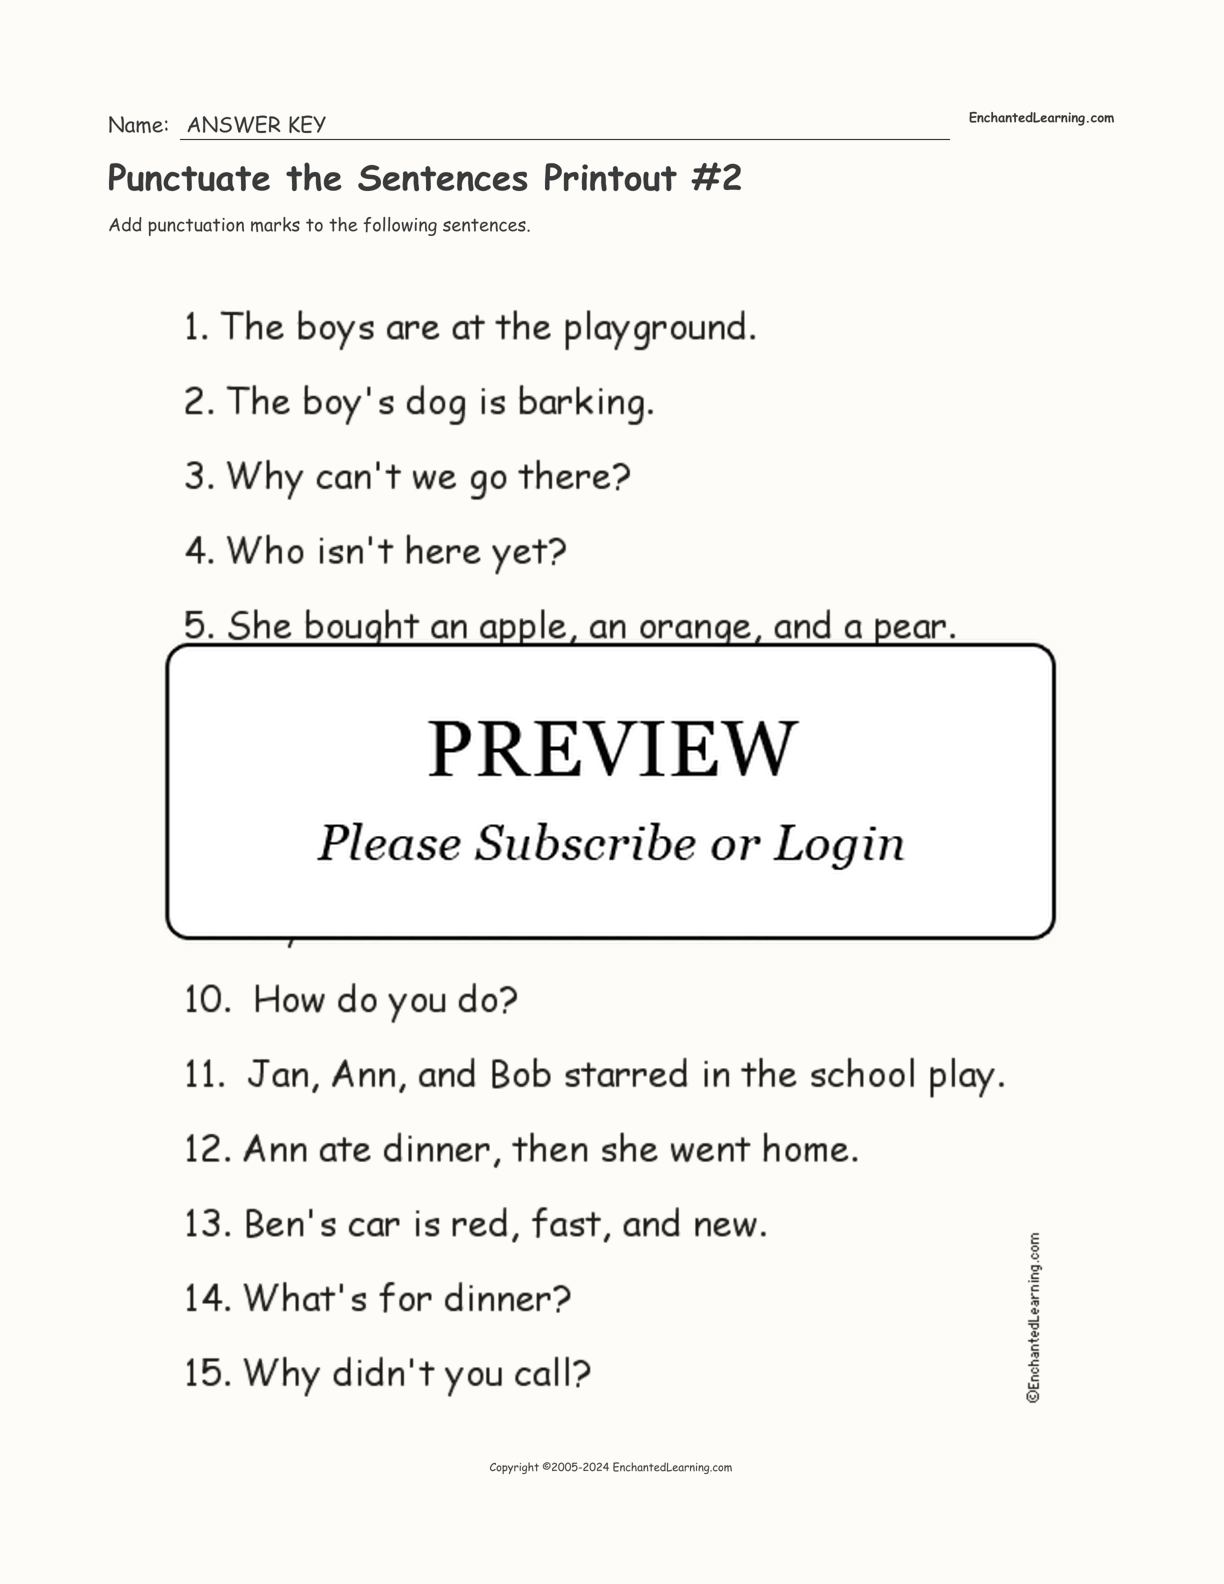 Punctuate the Sentences Printout #2 interactive worksheet page 2